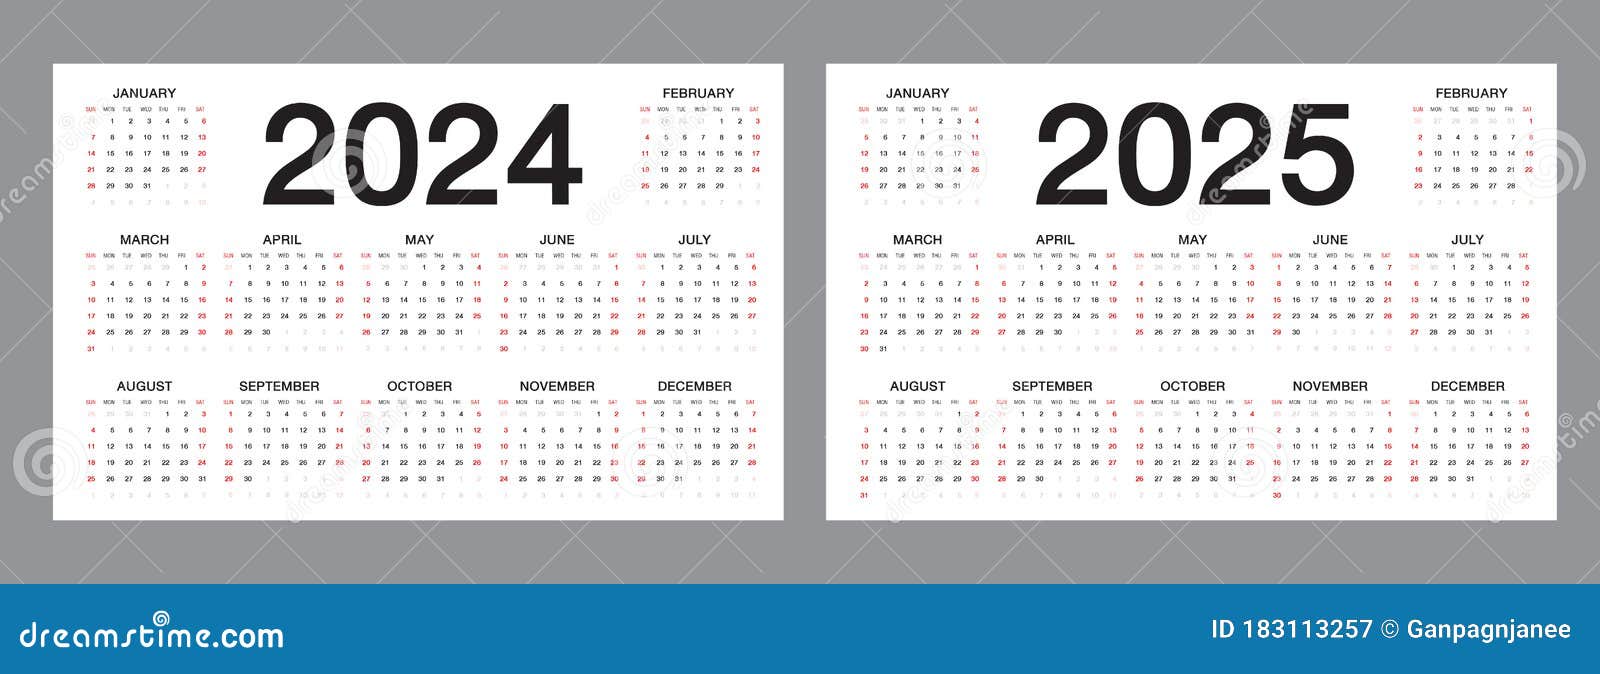 Simple Calendar Layout for 2024, 2025 Years on White Background, Desk